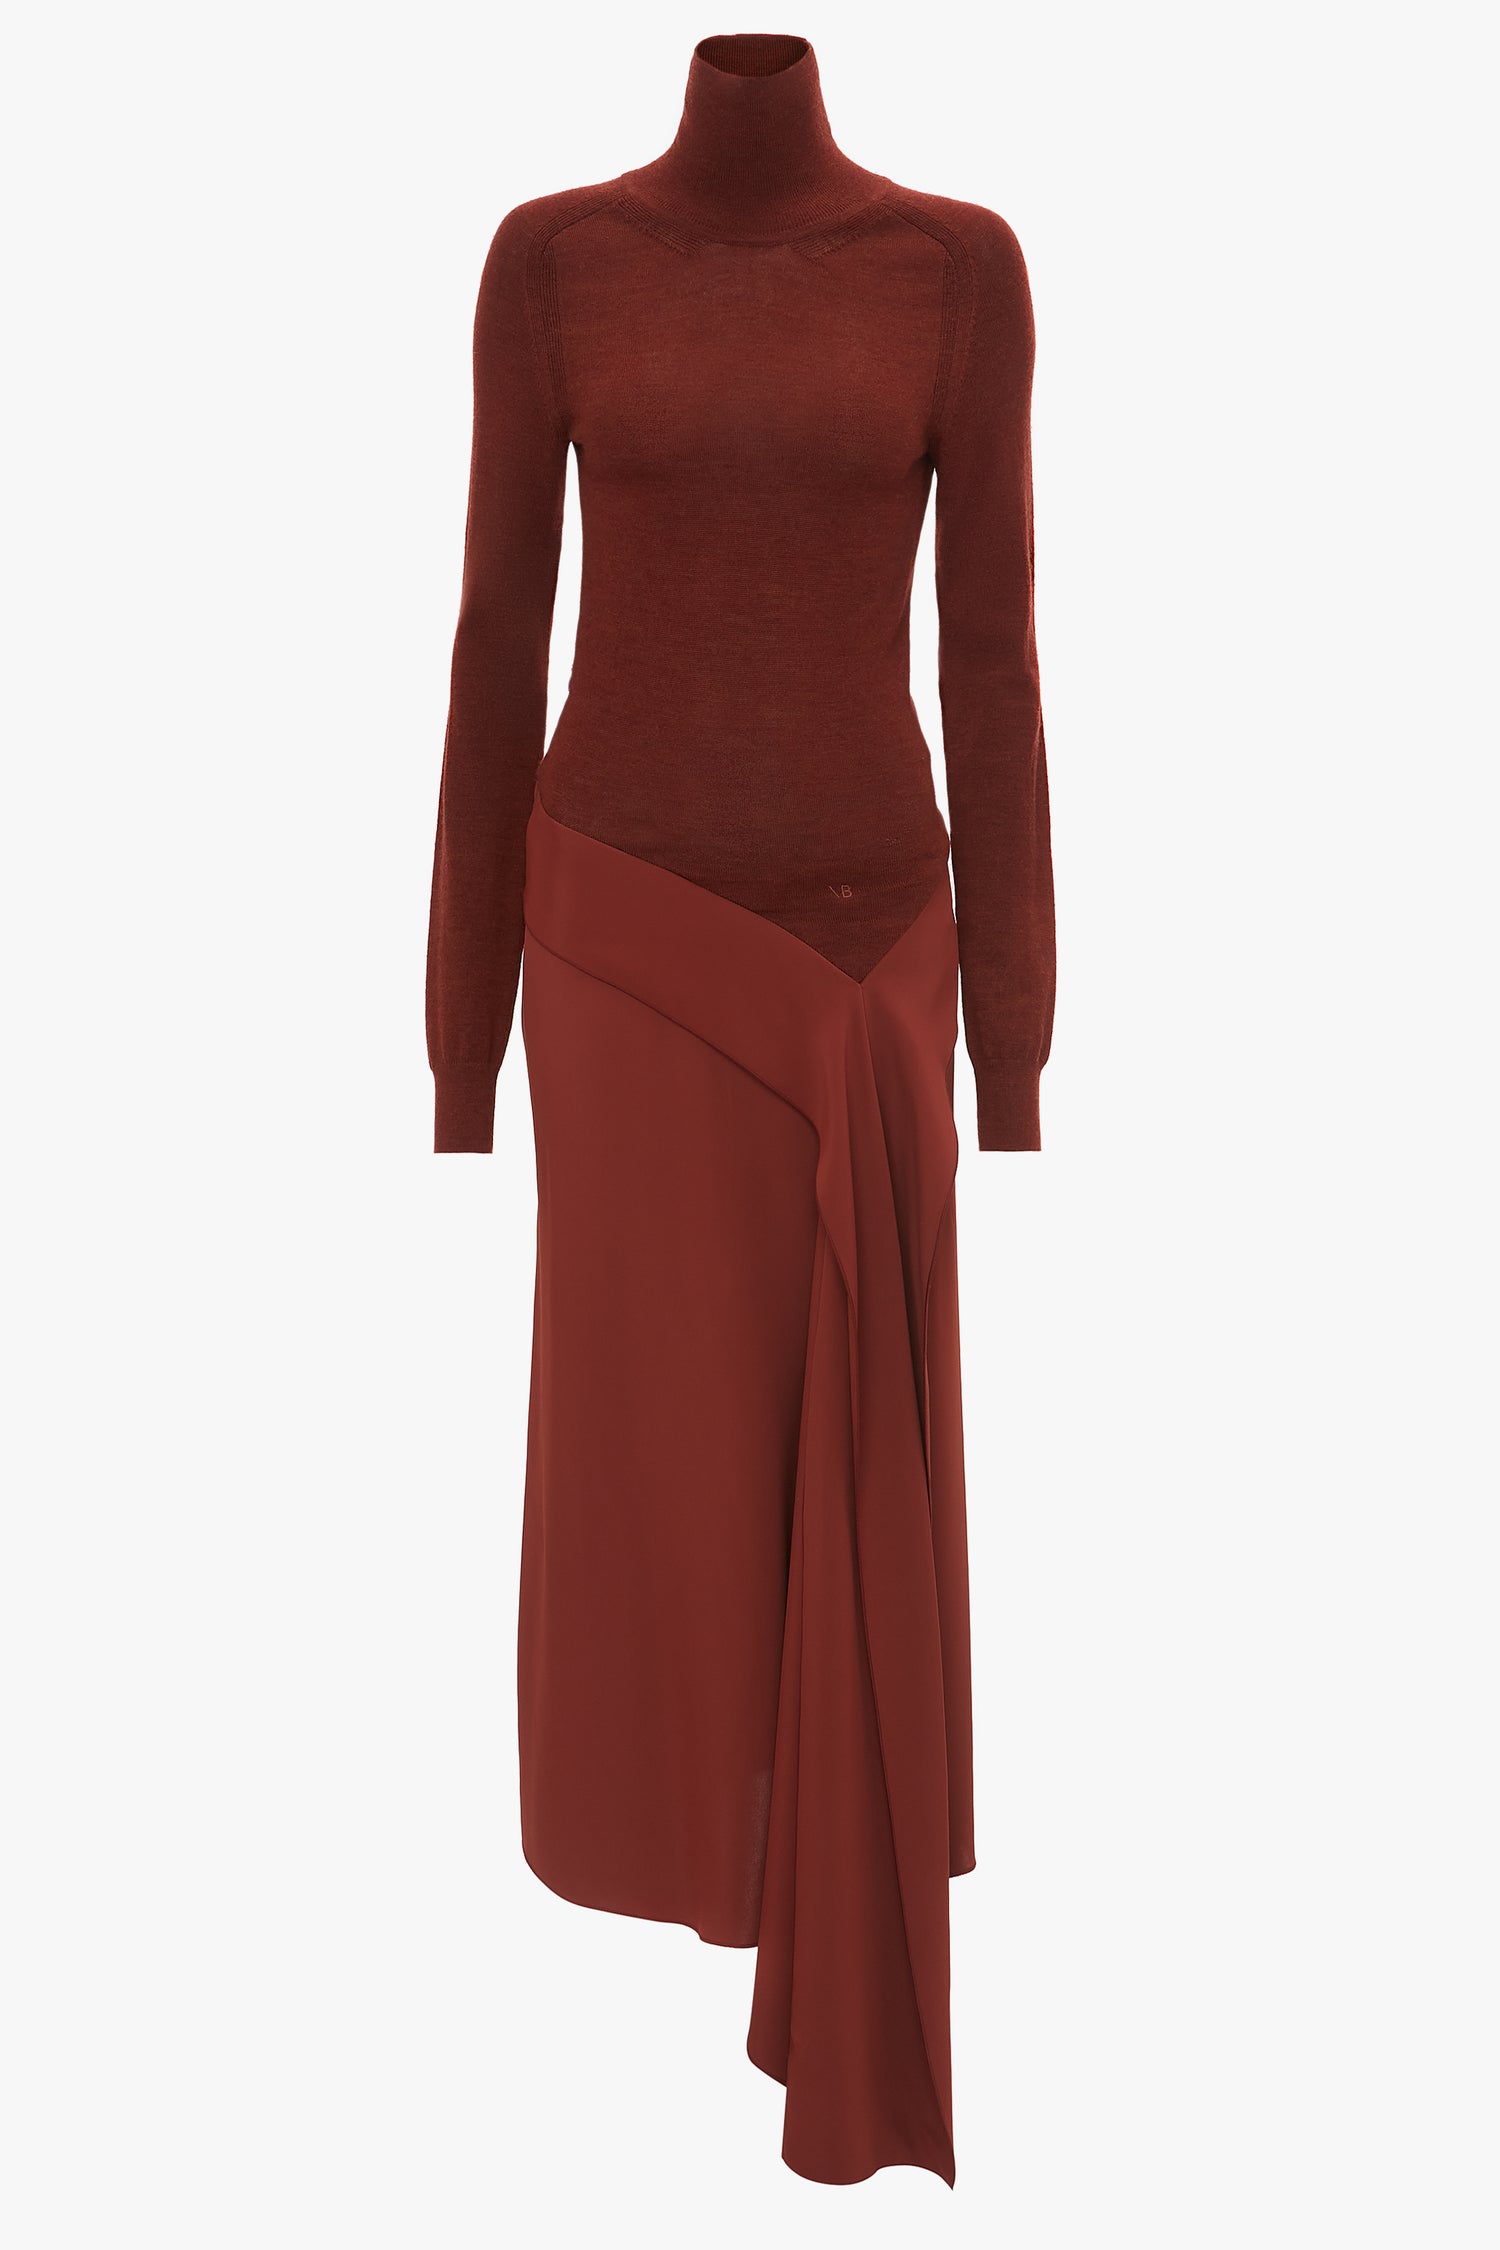 A fitted **High Neck Tie Detail Dress In Russet** by **Victoria Beckham**, reminiscent of Victoria Beckham's stylish midi dresses.